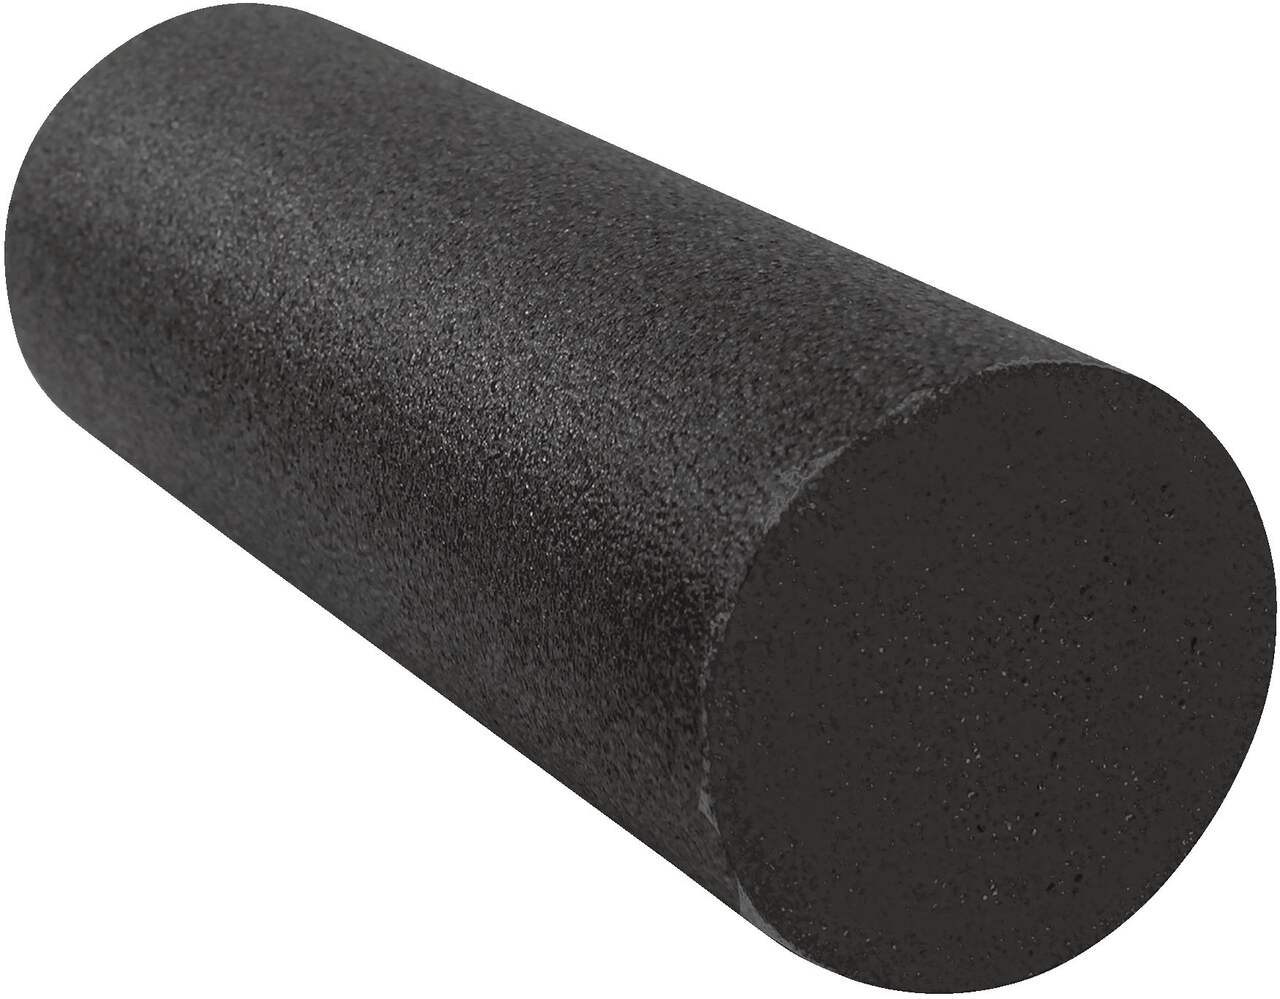 https://media-www.canadiantire.ca/product/playing/exercise/exercise-accessories/0840579/renew-medium-density-foam-roller-39e2f6b8-8911-43fb-aaed-b145753ddcb1-jpgrendition.jpg?imdensity=1&imwidth=640&impolicy=mZoom